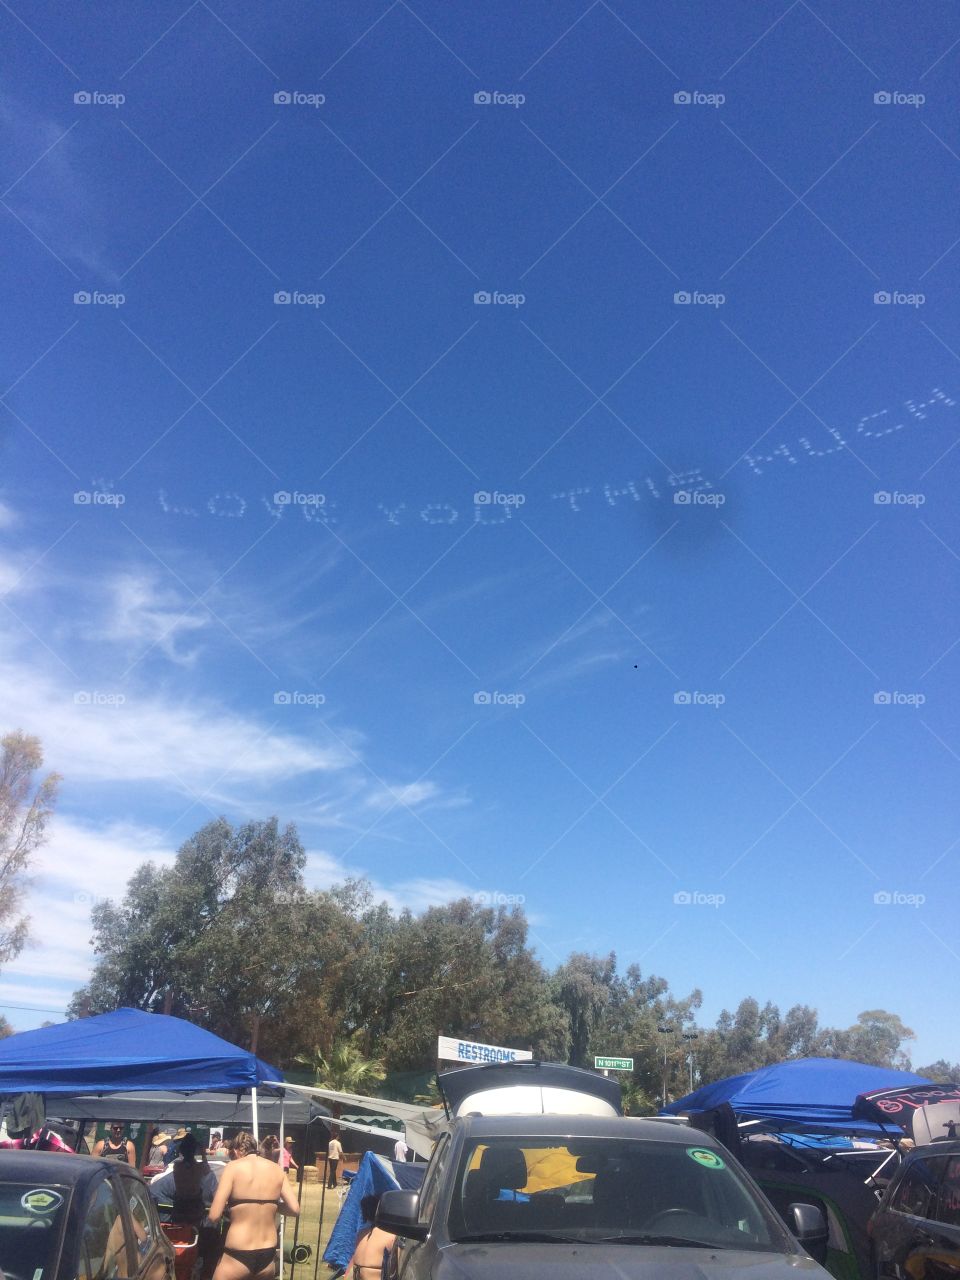 “I love you this much” written by a plane over the Coachella music festival 